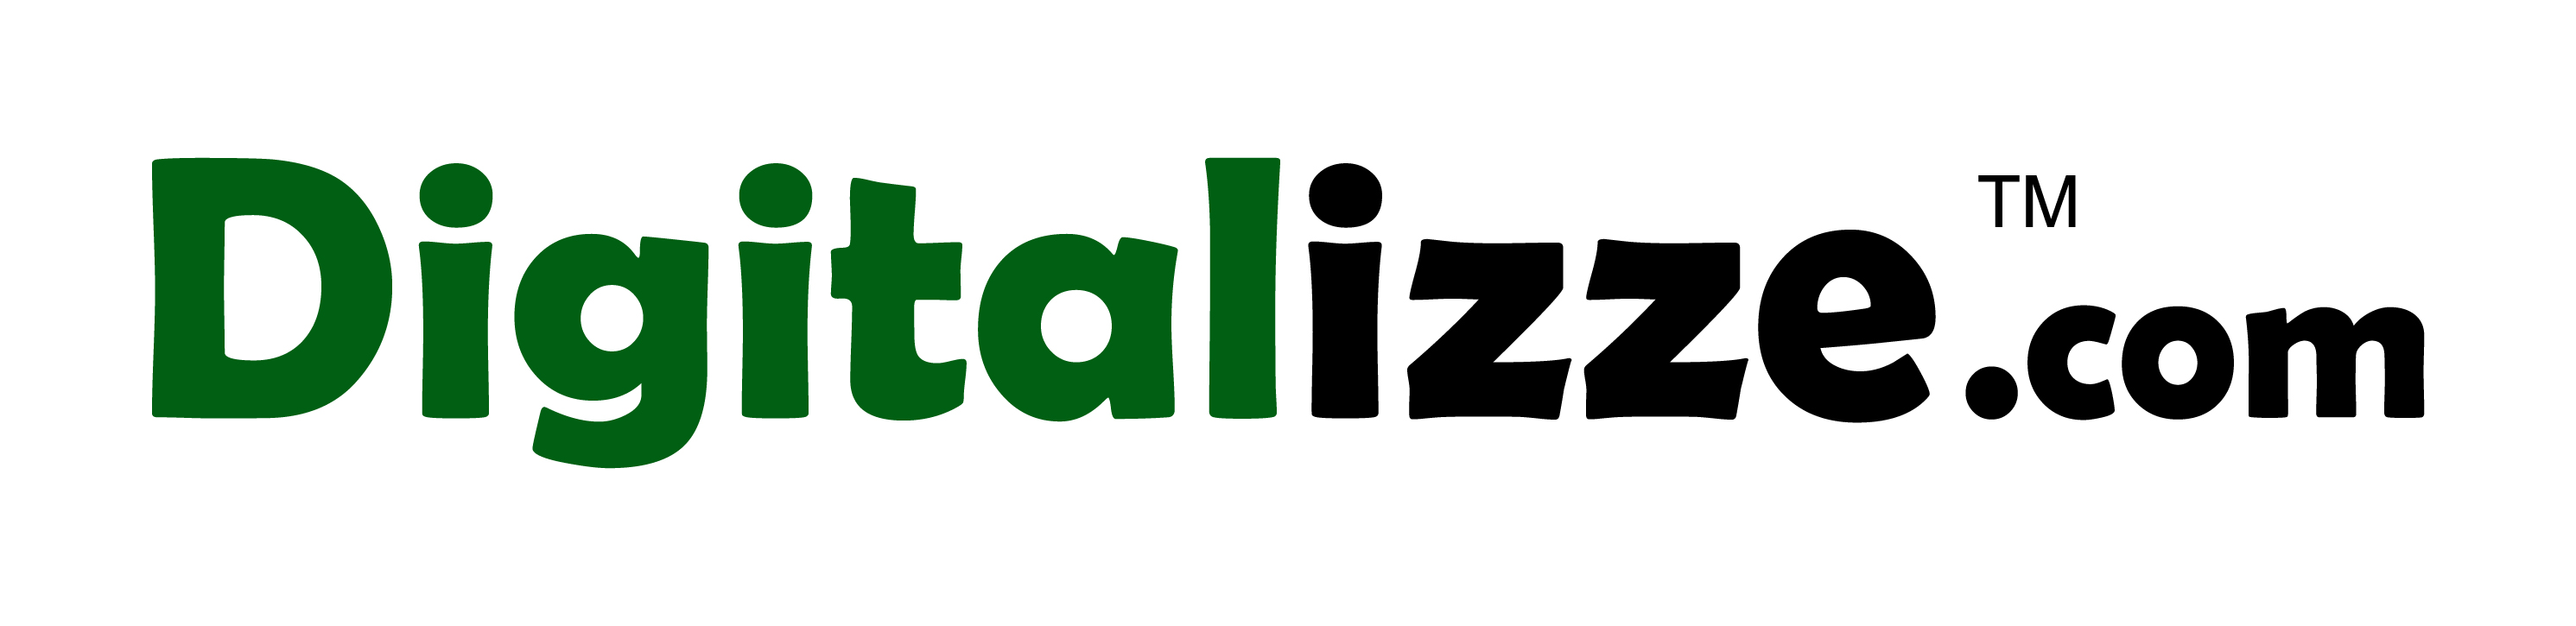 Digitalizze - Digital Advertising, Marketing, and other Services